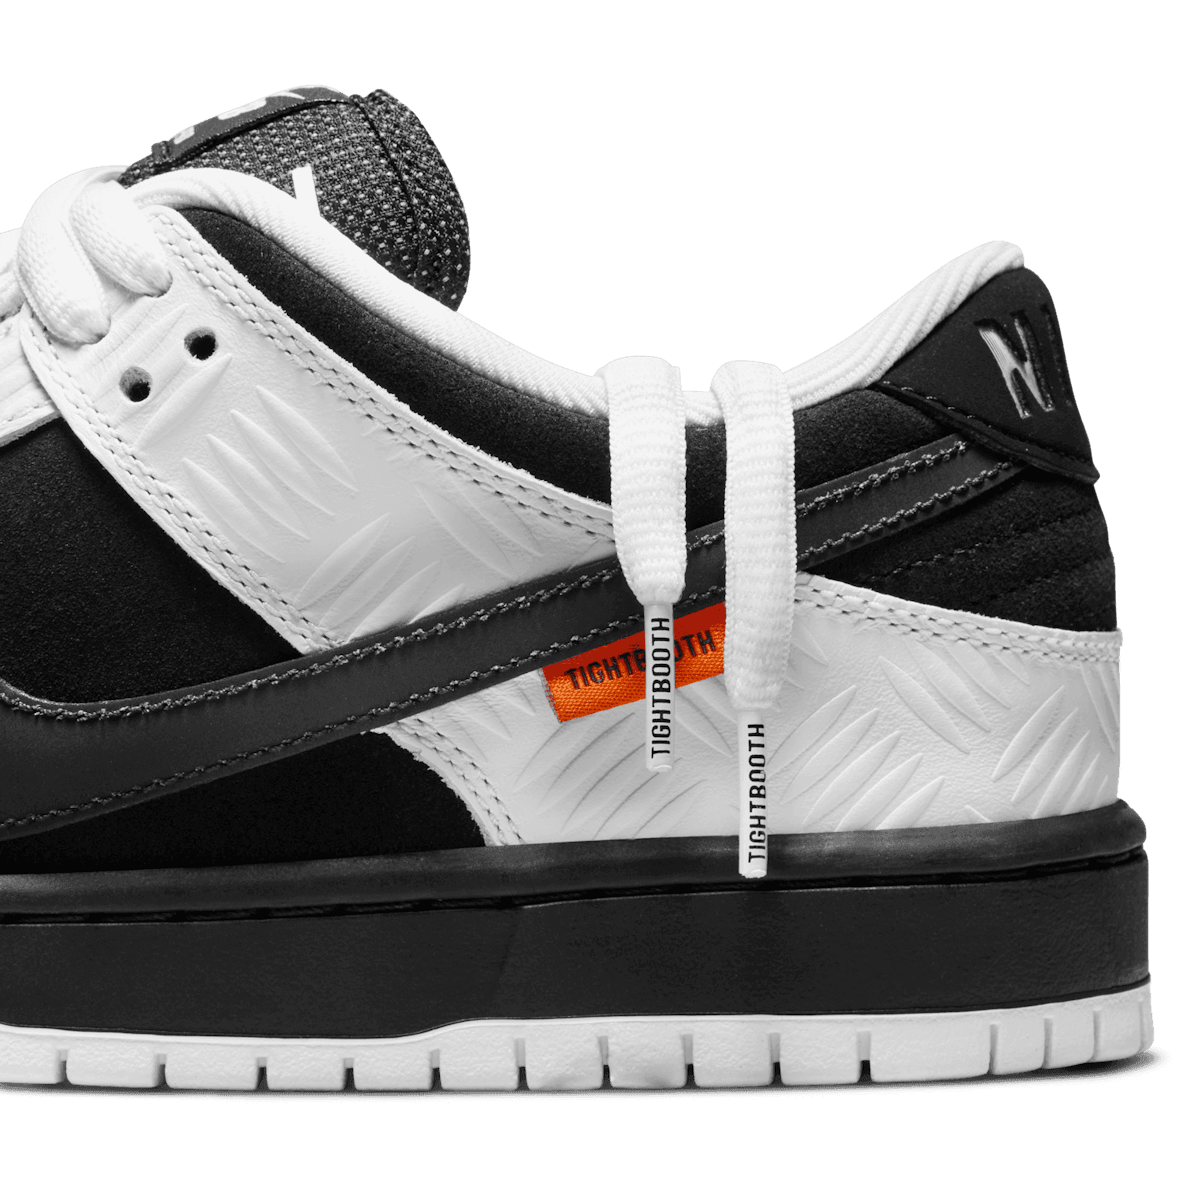 Nike SB Dunk Low Tightbooth - FD2629-100 Raffles and Release Date